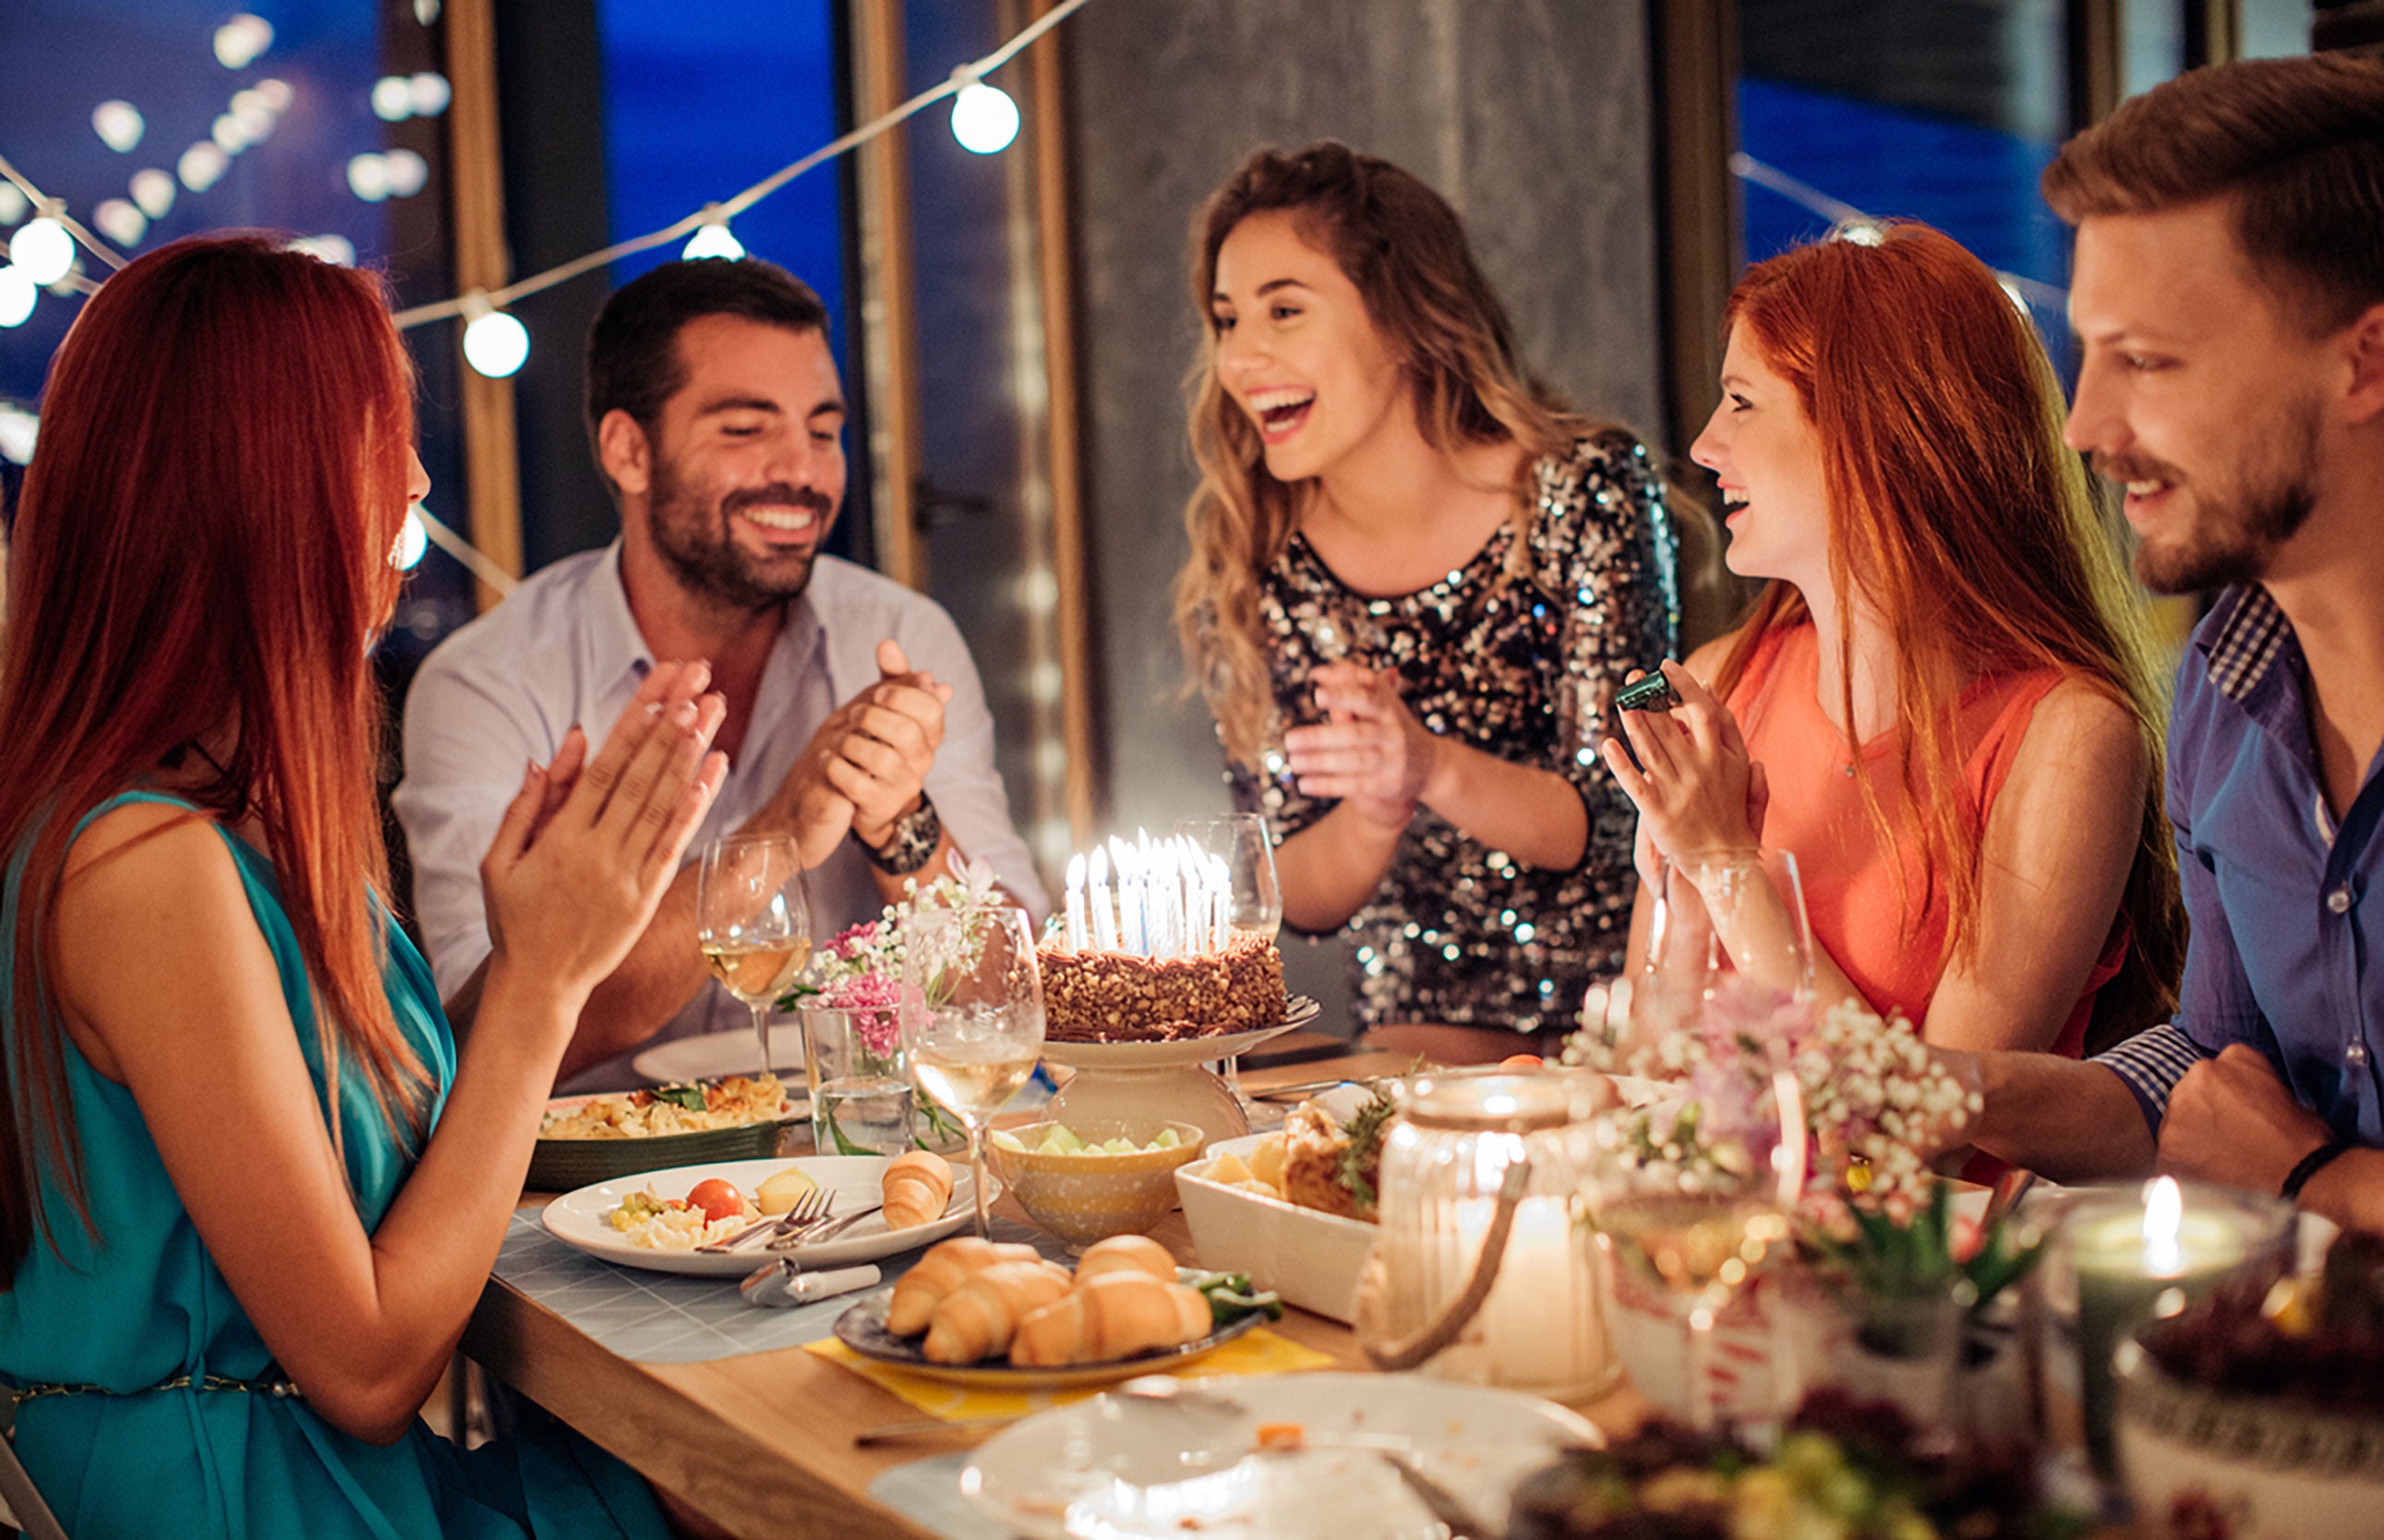 Parties are even more fun when your credit card's earning you solid deals.